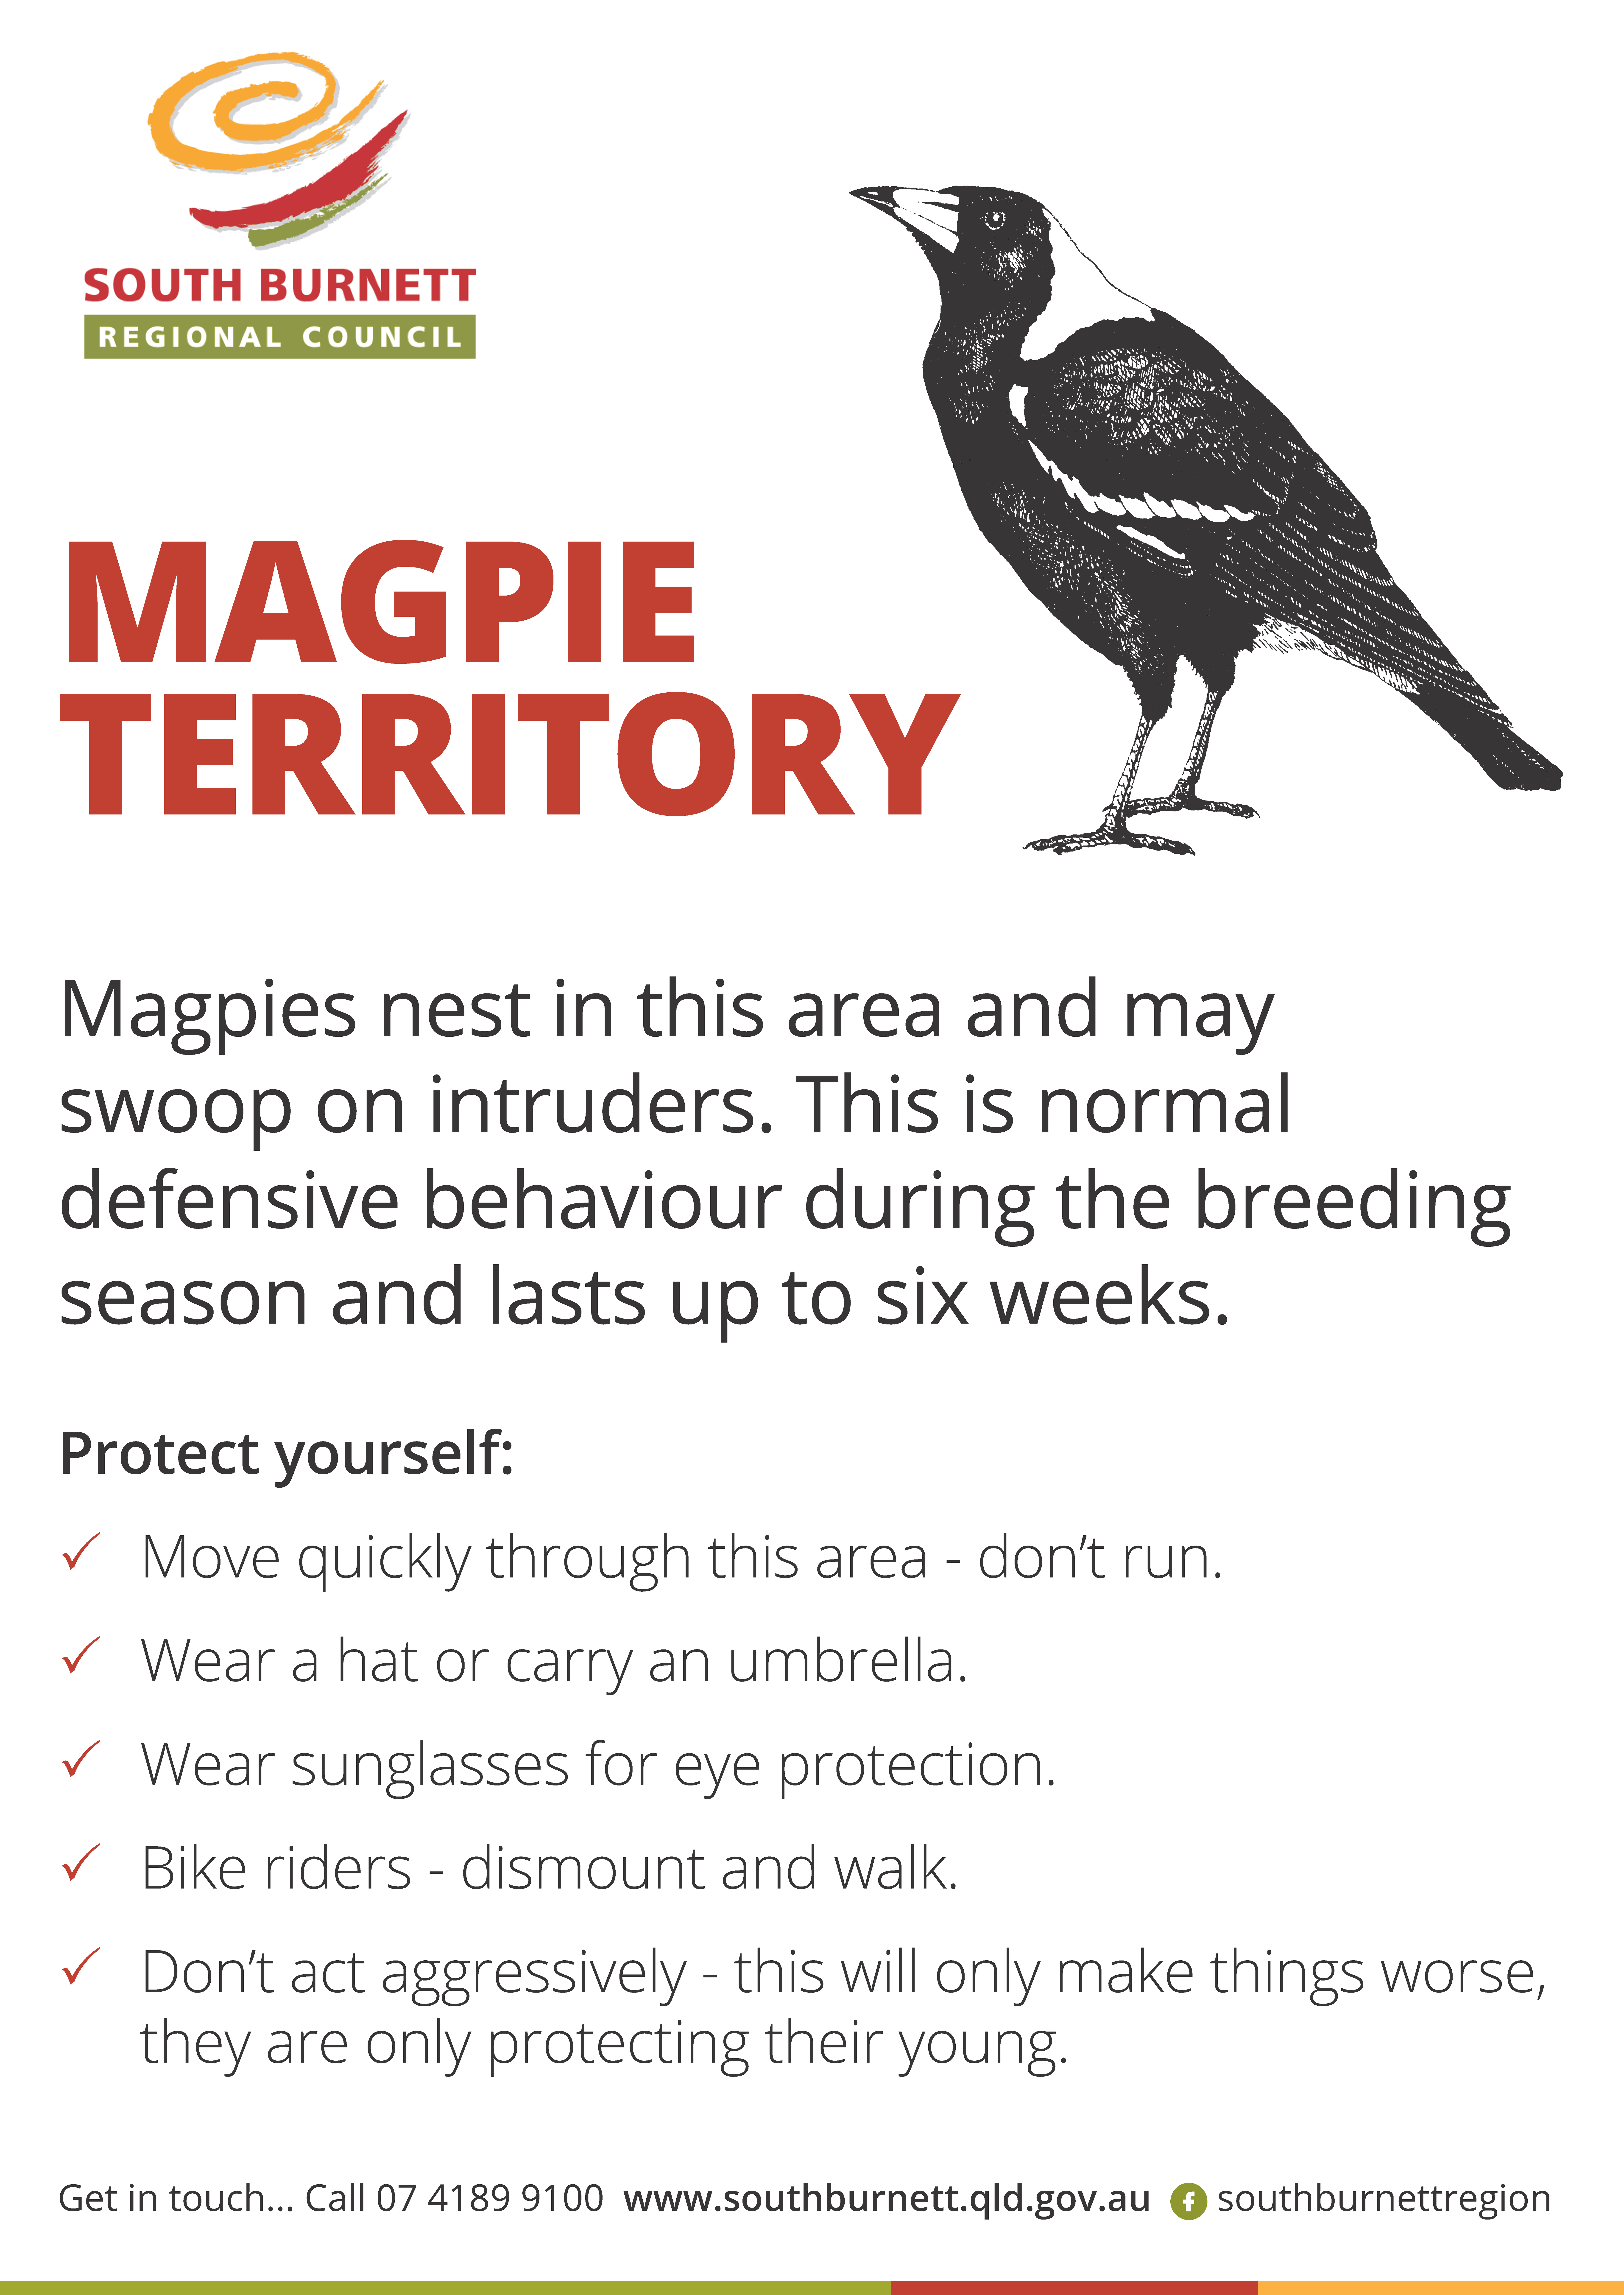 Image: Council Magpie Territory sign